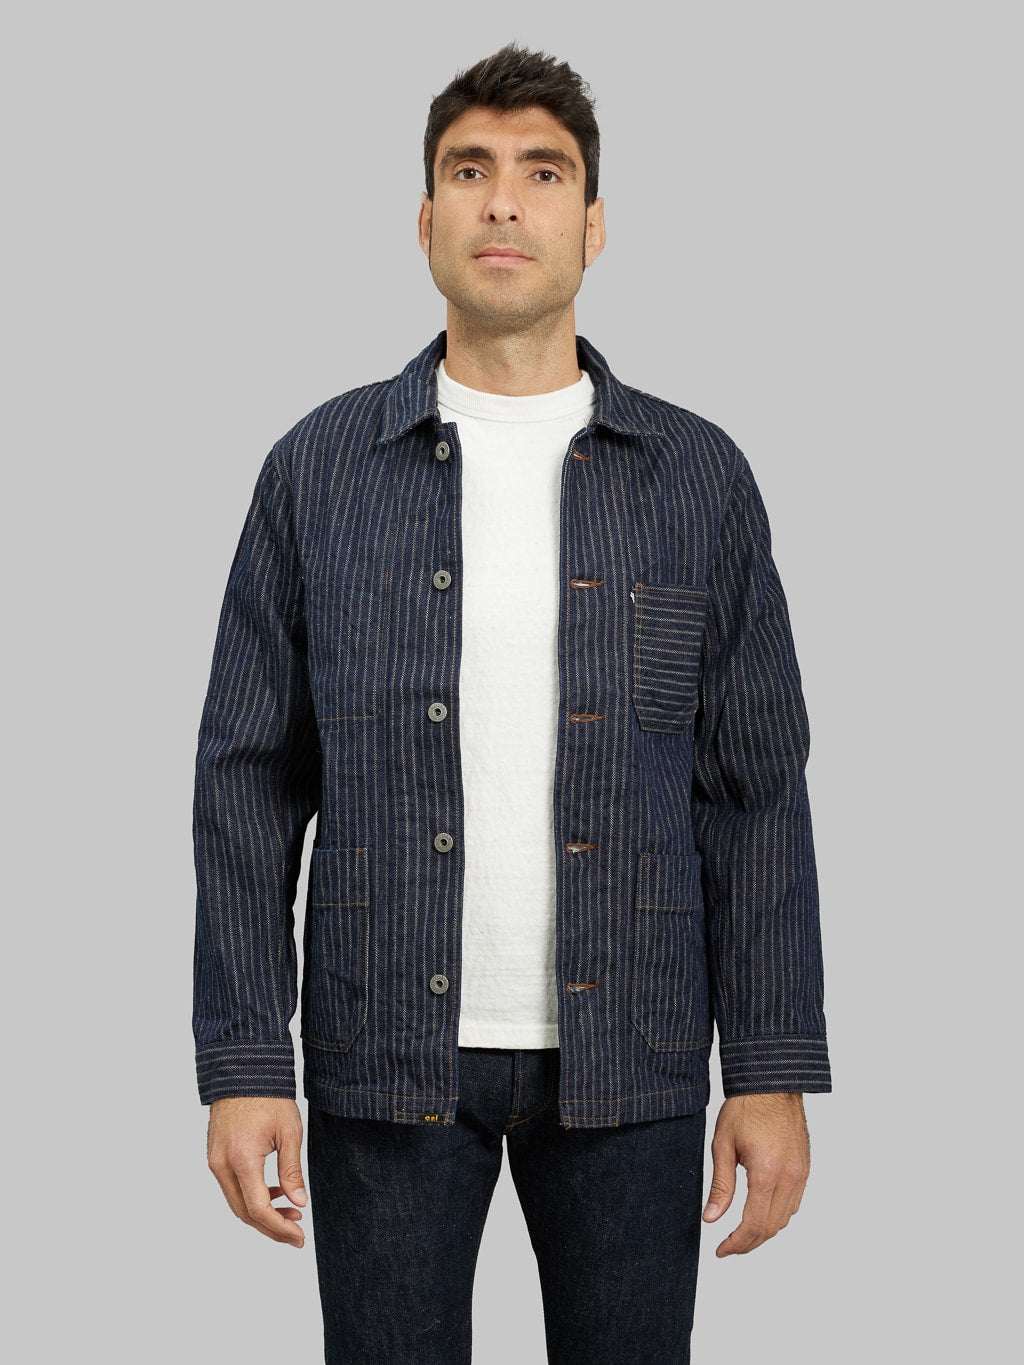 ONI Denim HJS Drop Needle Stitching Jacquard Striped Coverall model front fit